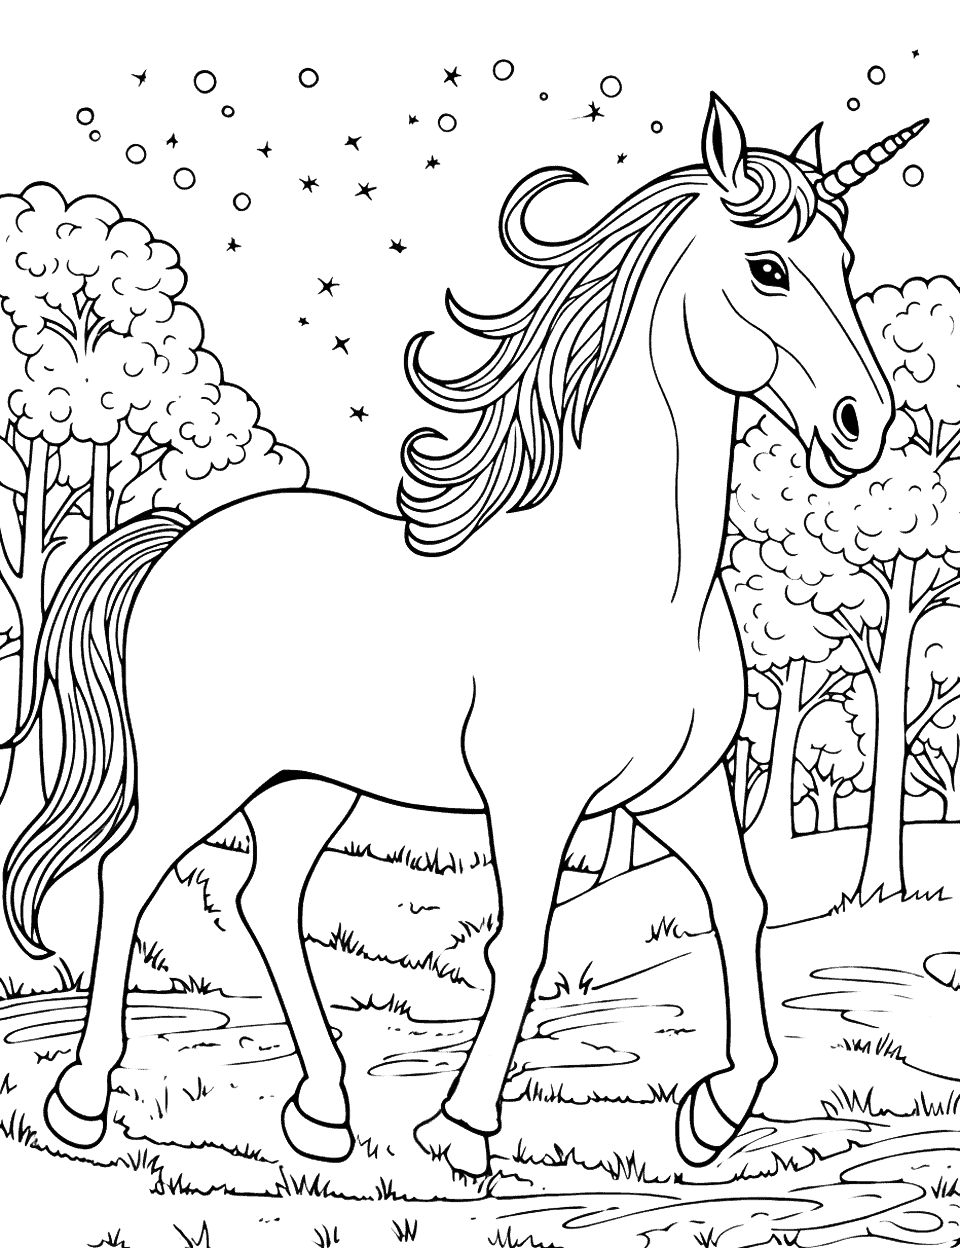 Unicorn in a Magical Forest Horse Coloring Page - A unicorn prancing through a magical forest with twinkling stars above.